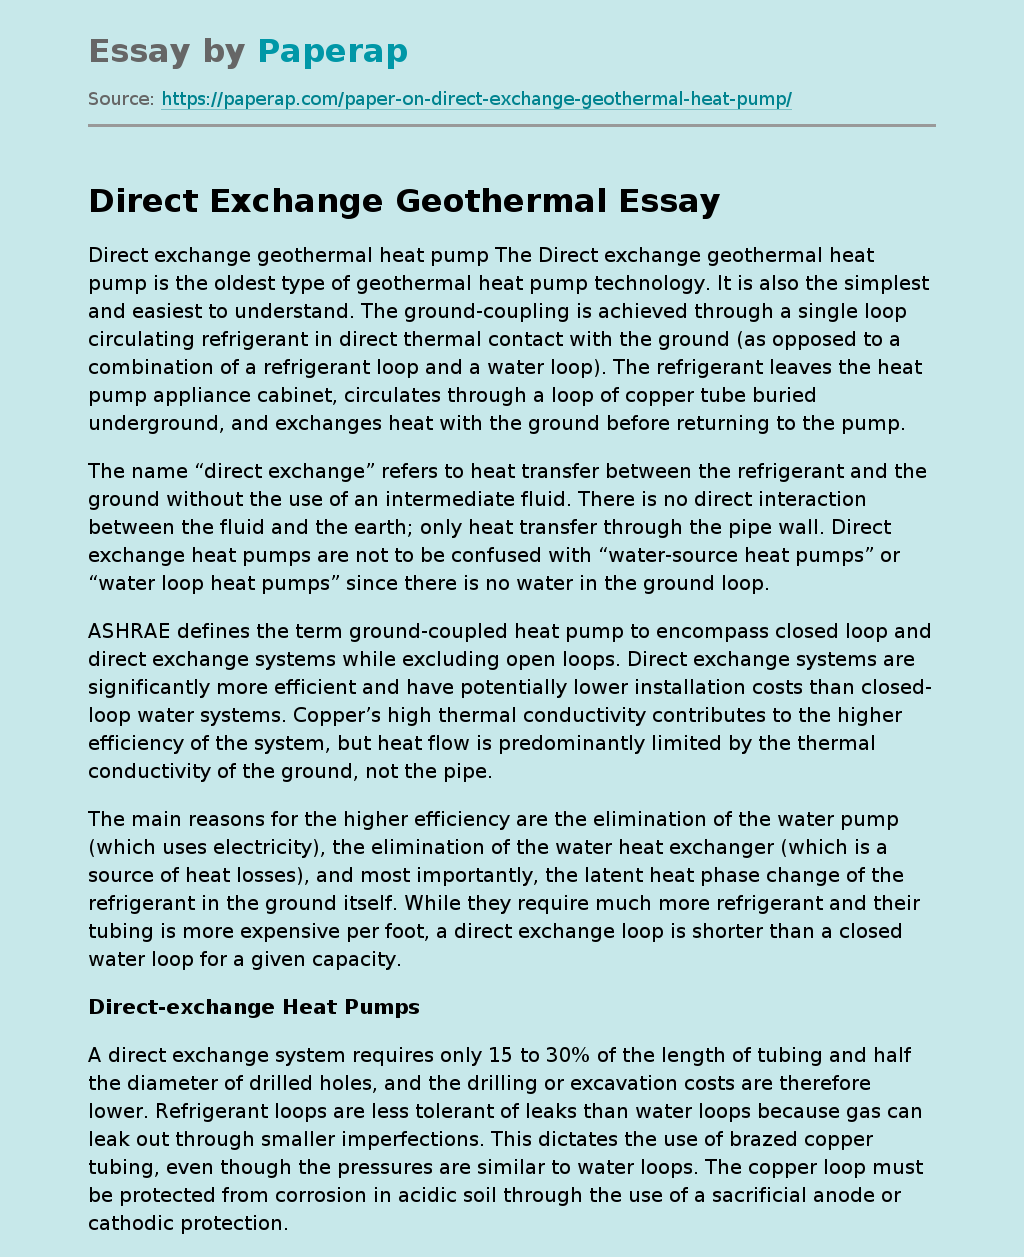 Direct Exchange Geothermal